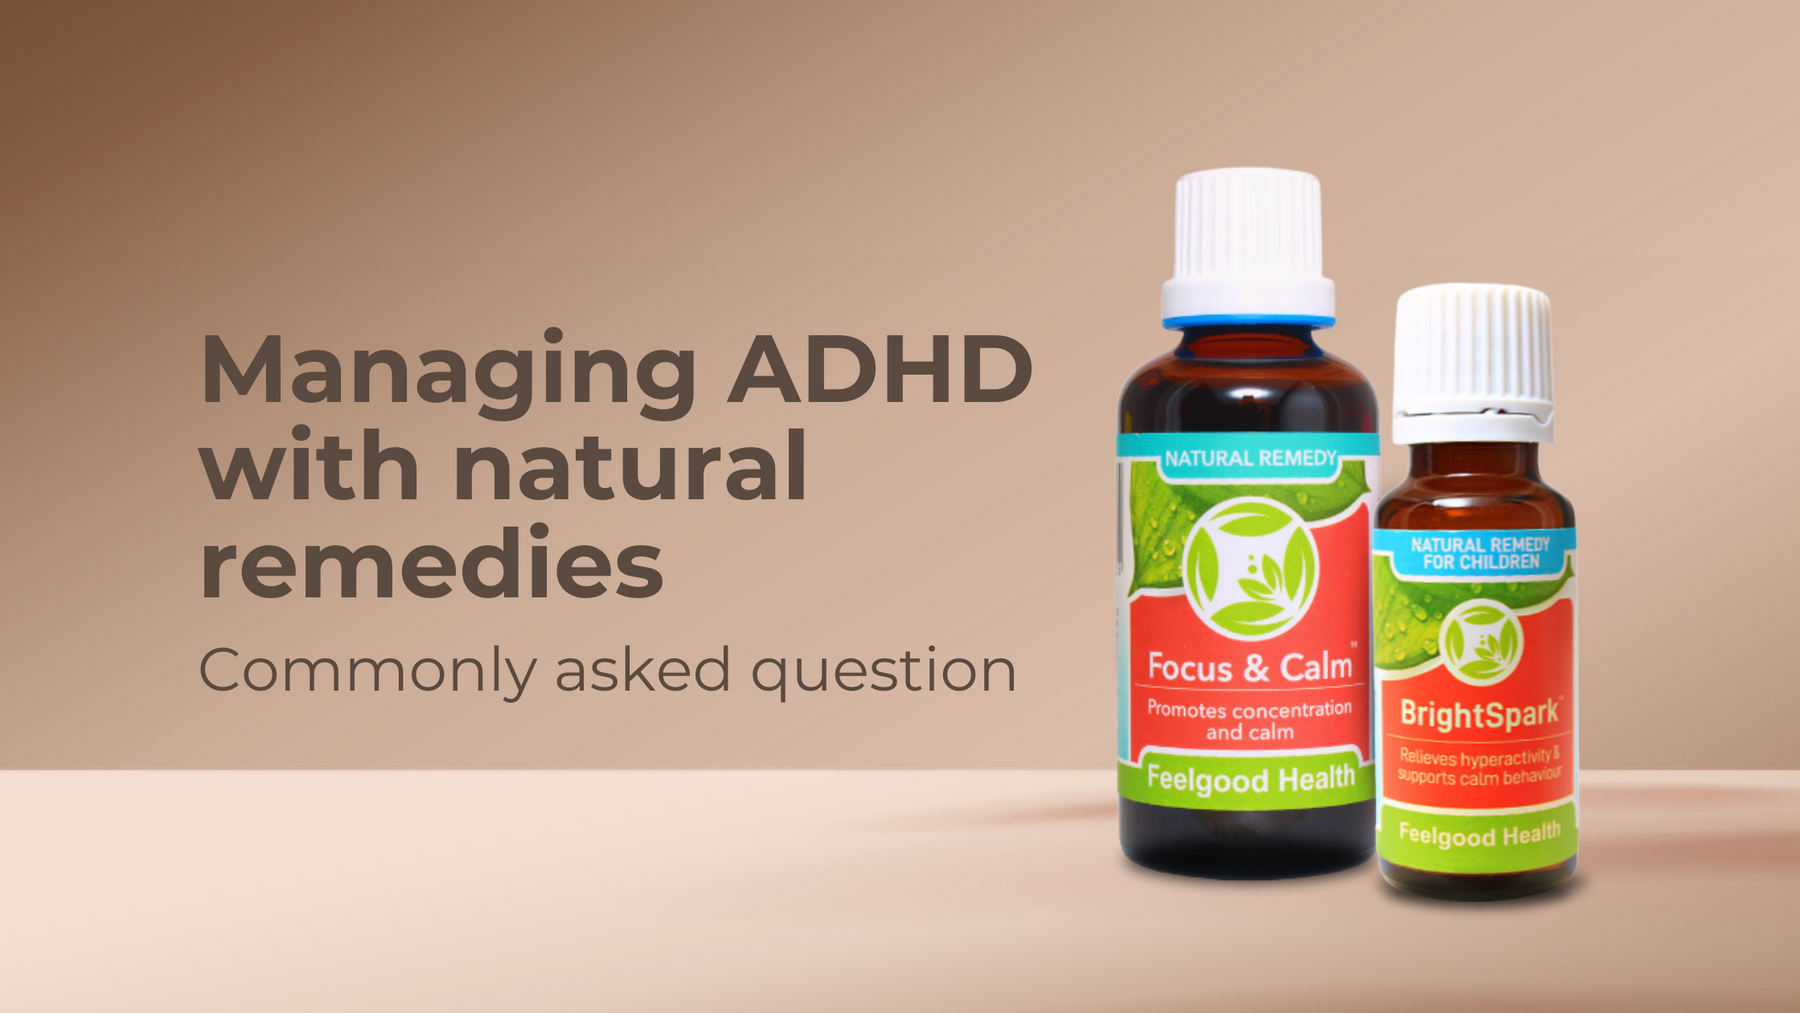 Natural remedies for children's ADHD, Focus & Calm and BrightSpark commonly asked questions